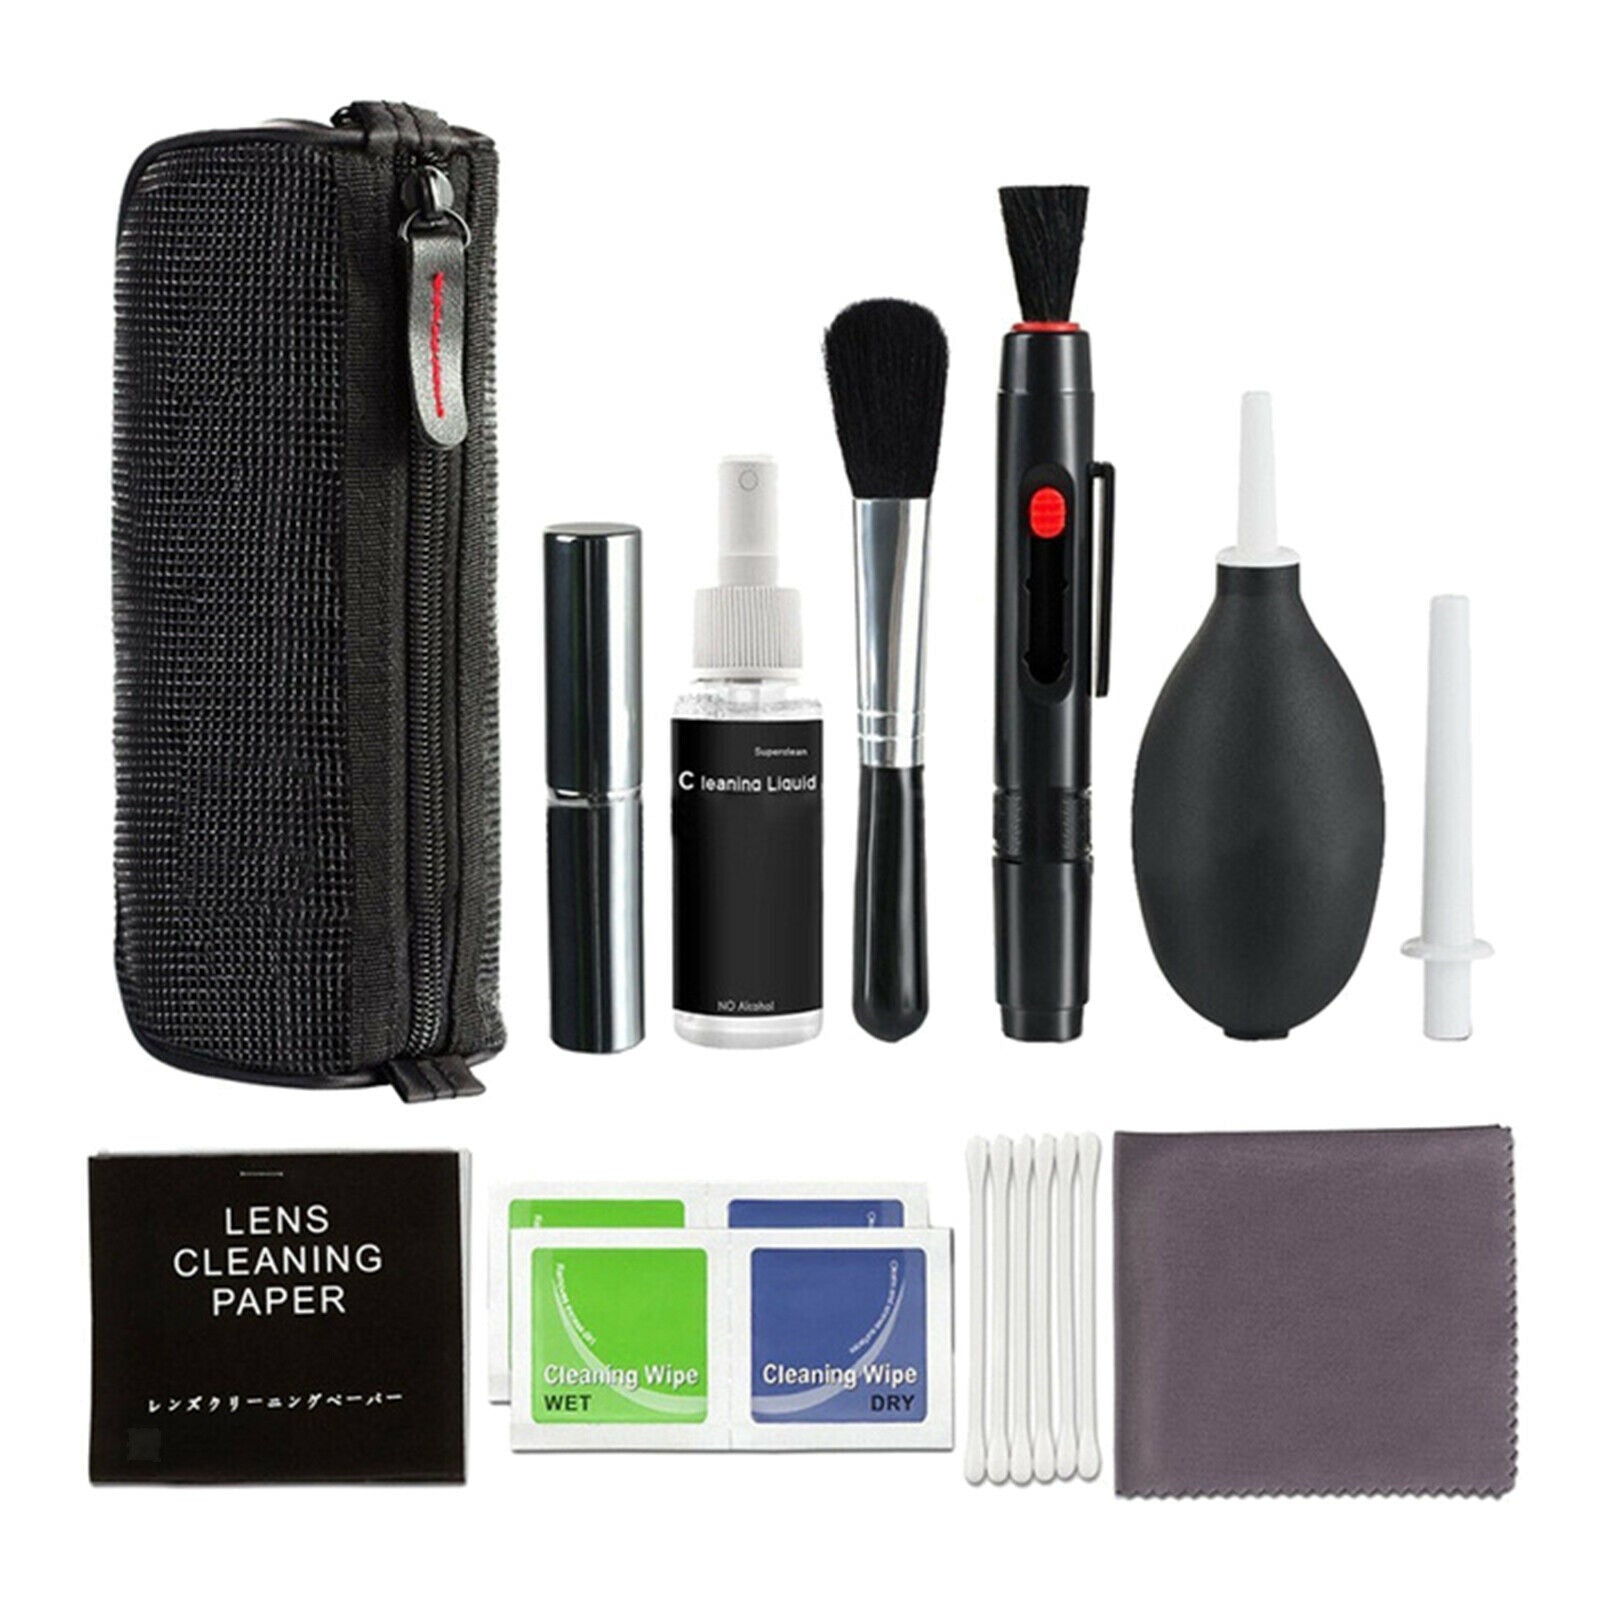 Professional Camera Lens Cleaning kit Air Blower Cleaning Cloth Storage Bag